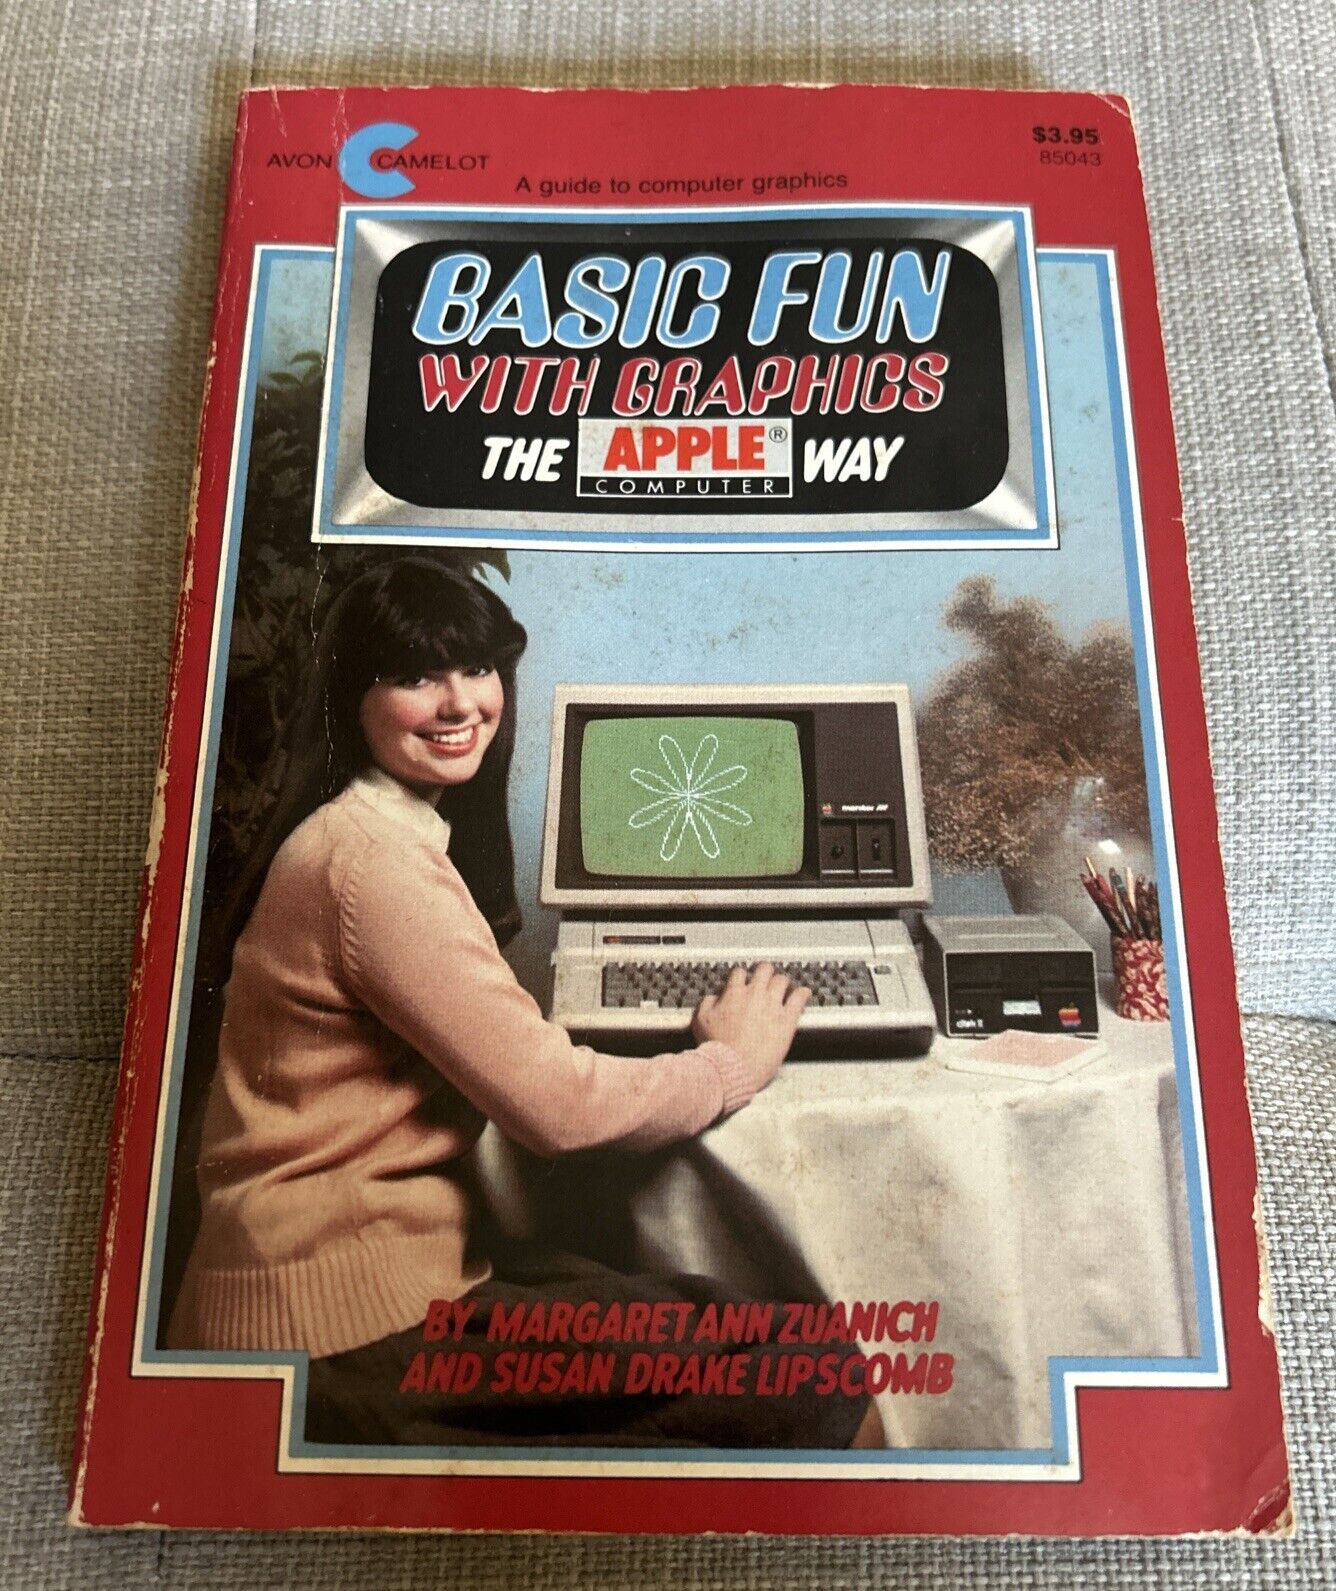 Basic Fun With Graphics The Apple Computer Way Coding Book 1983 Avon  Camelot